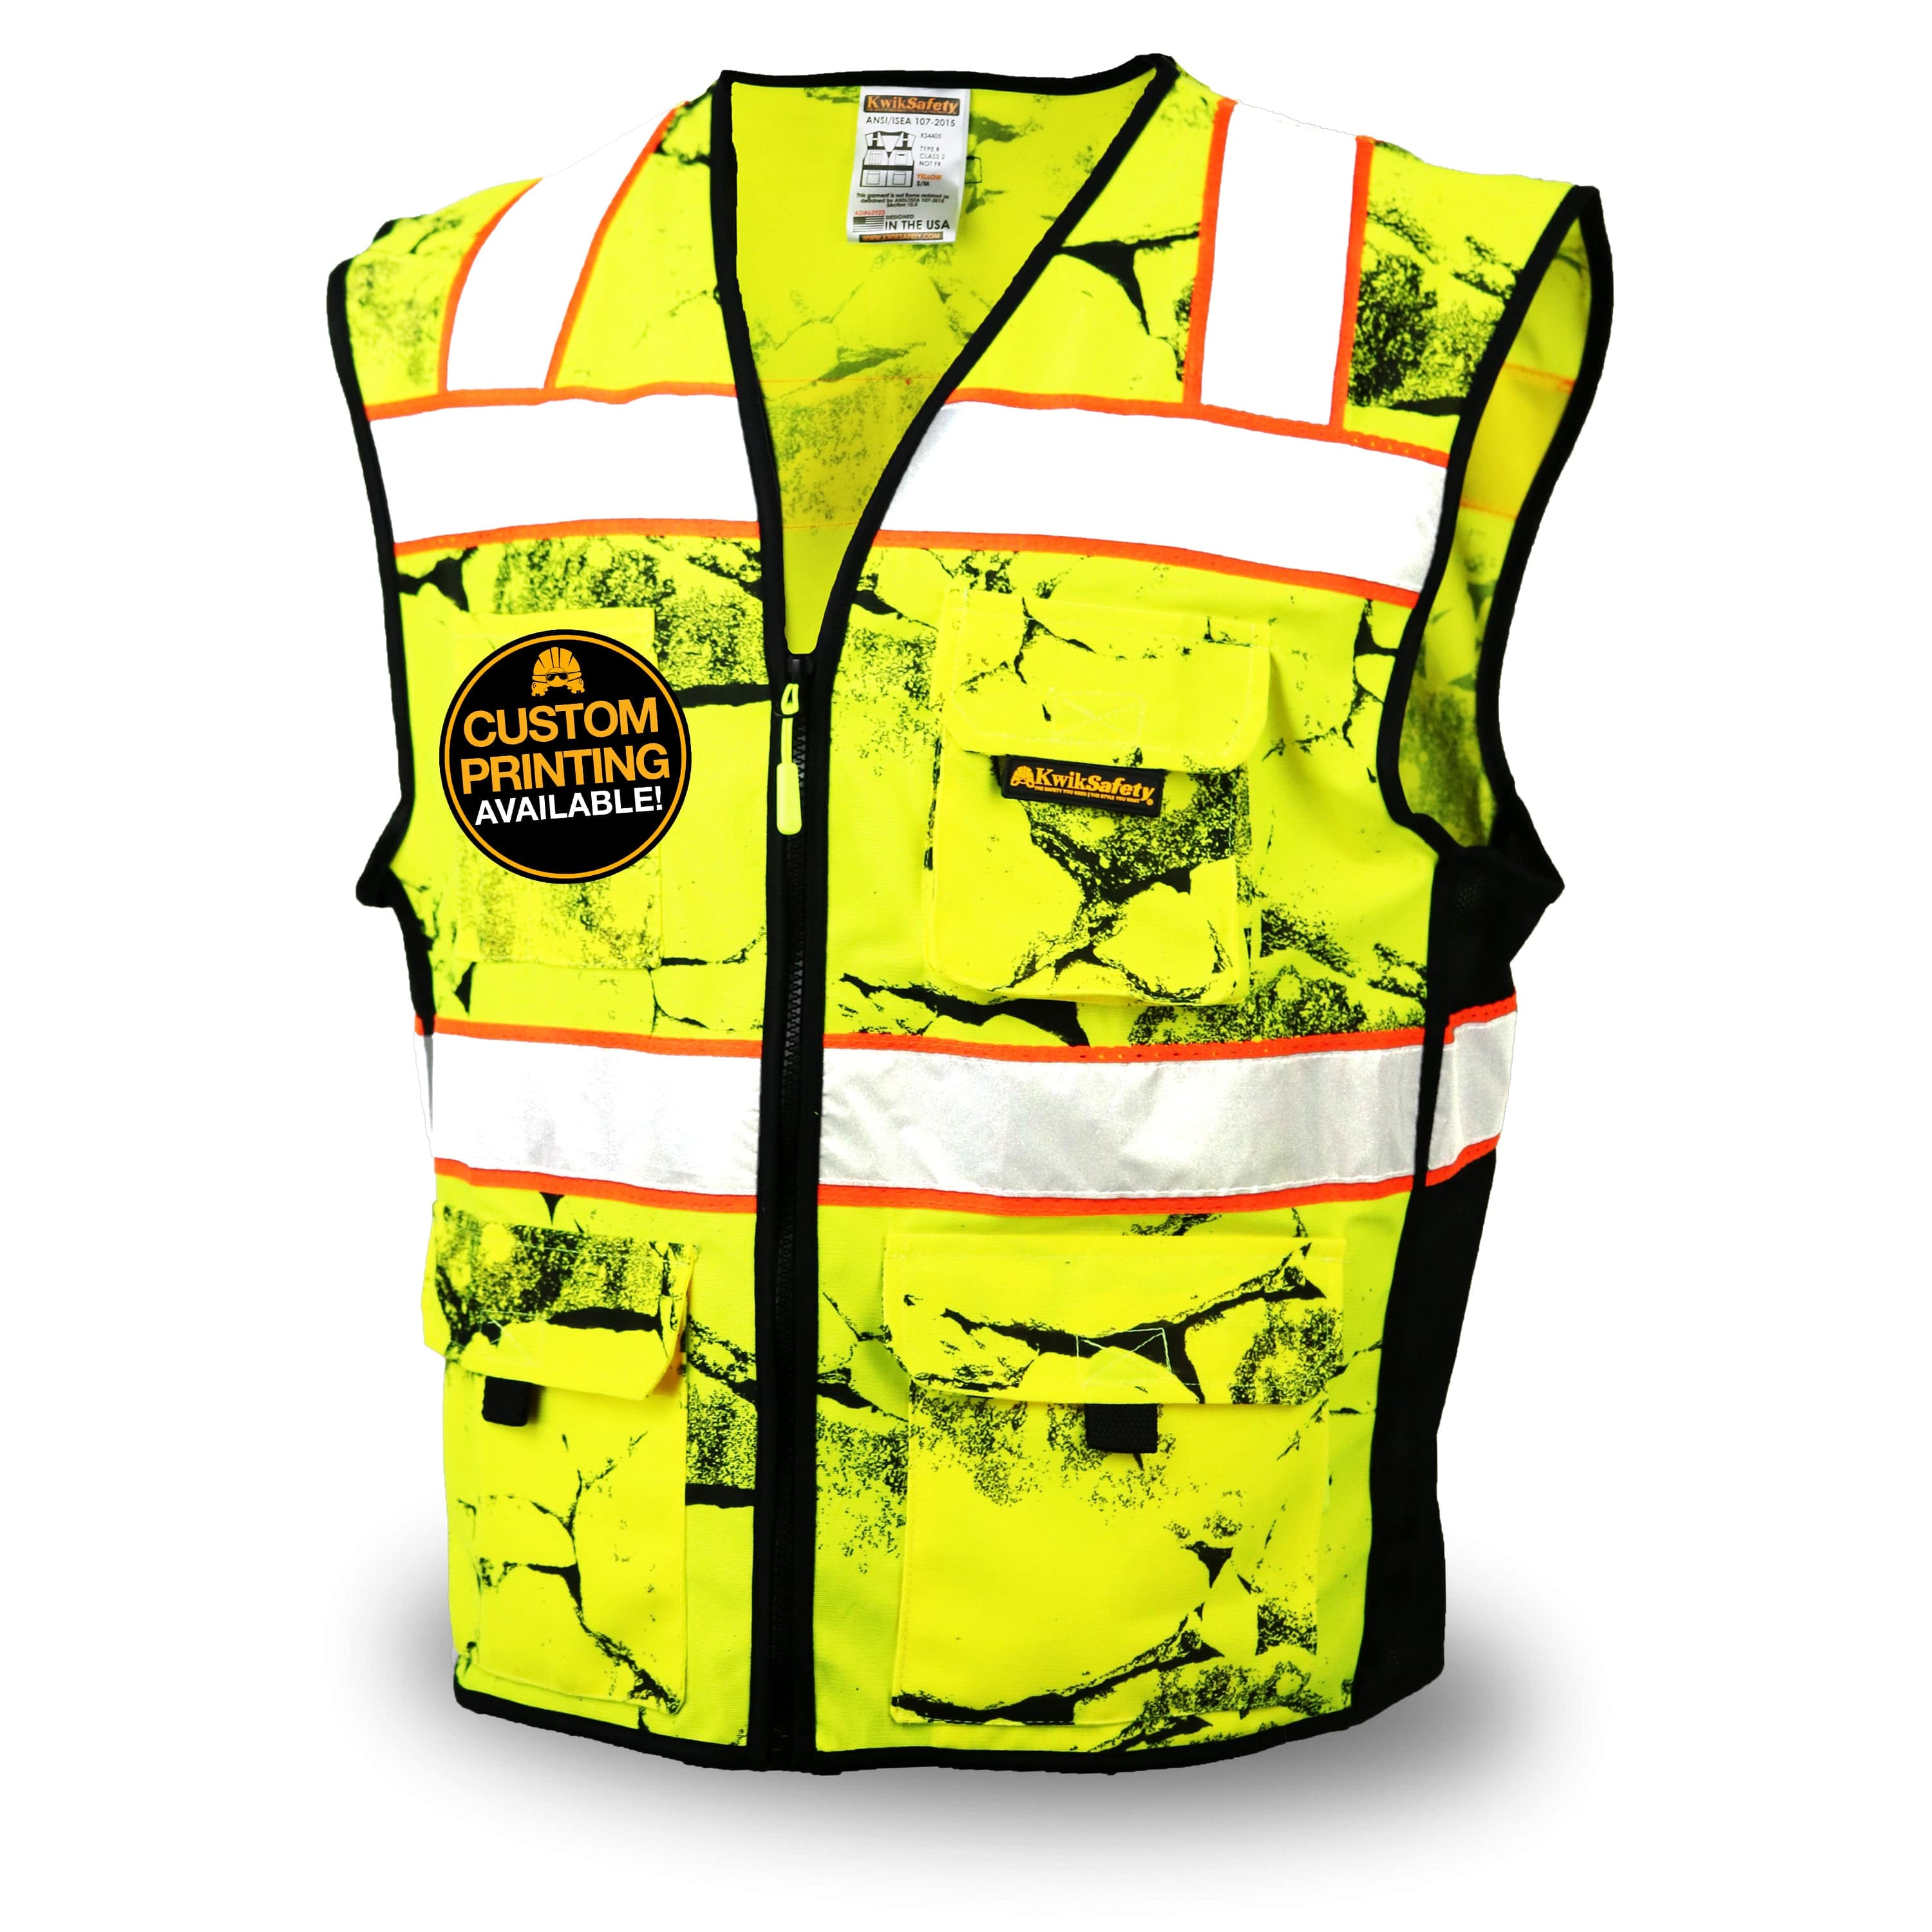 KwikSafety UNCLE WILLY'S WALL Safety Vest (LIMITED EDITION CAMO DESIGN